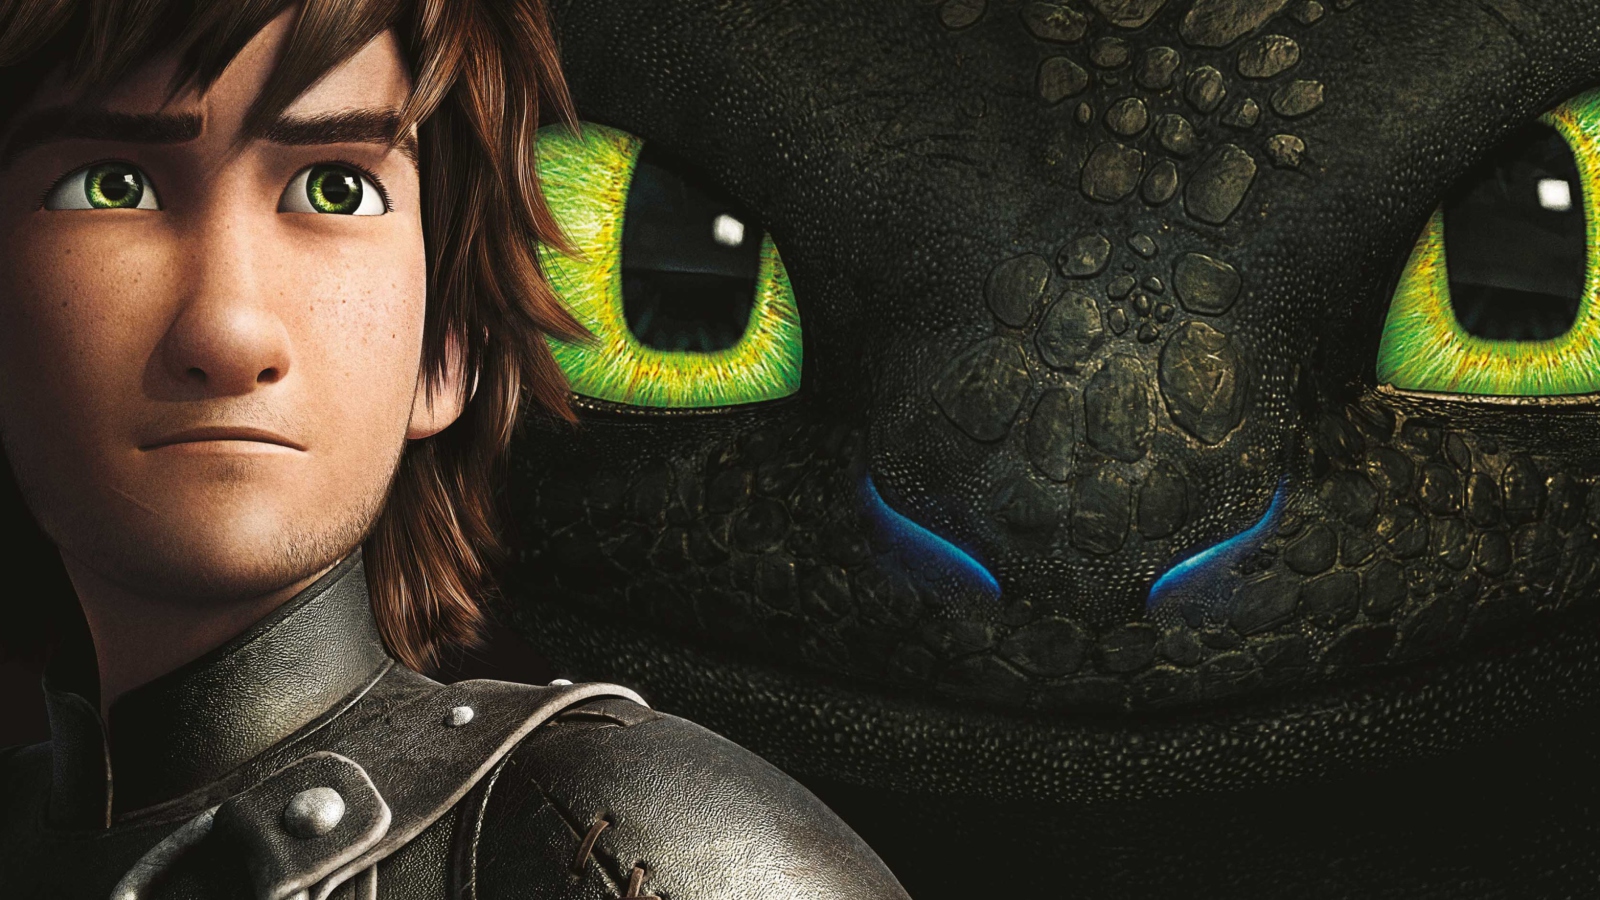 How To Train Your Dragon wallpaper 1600x900